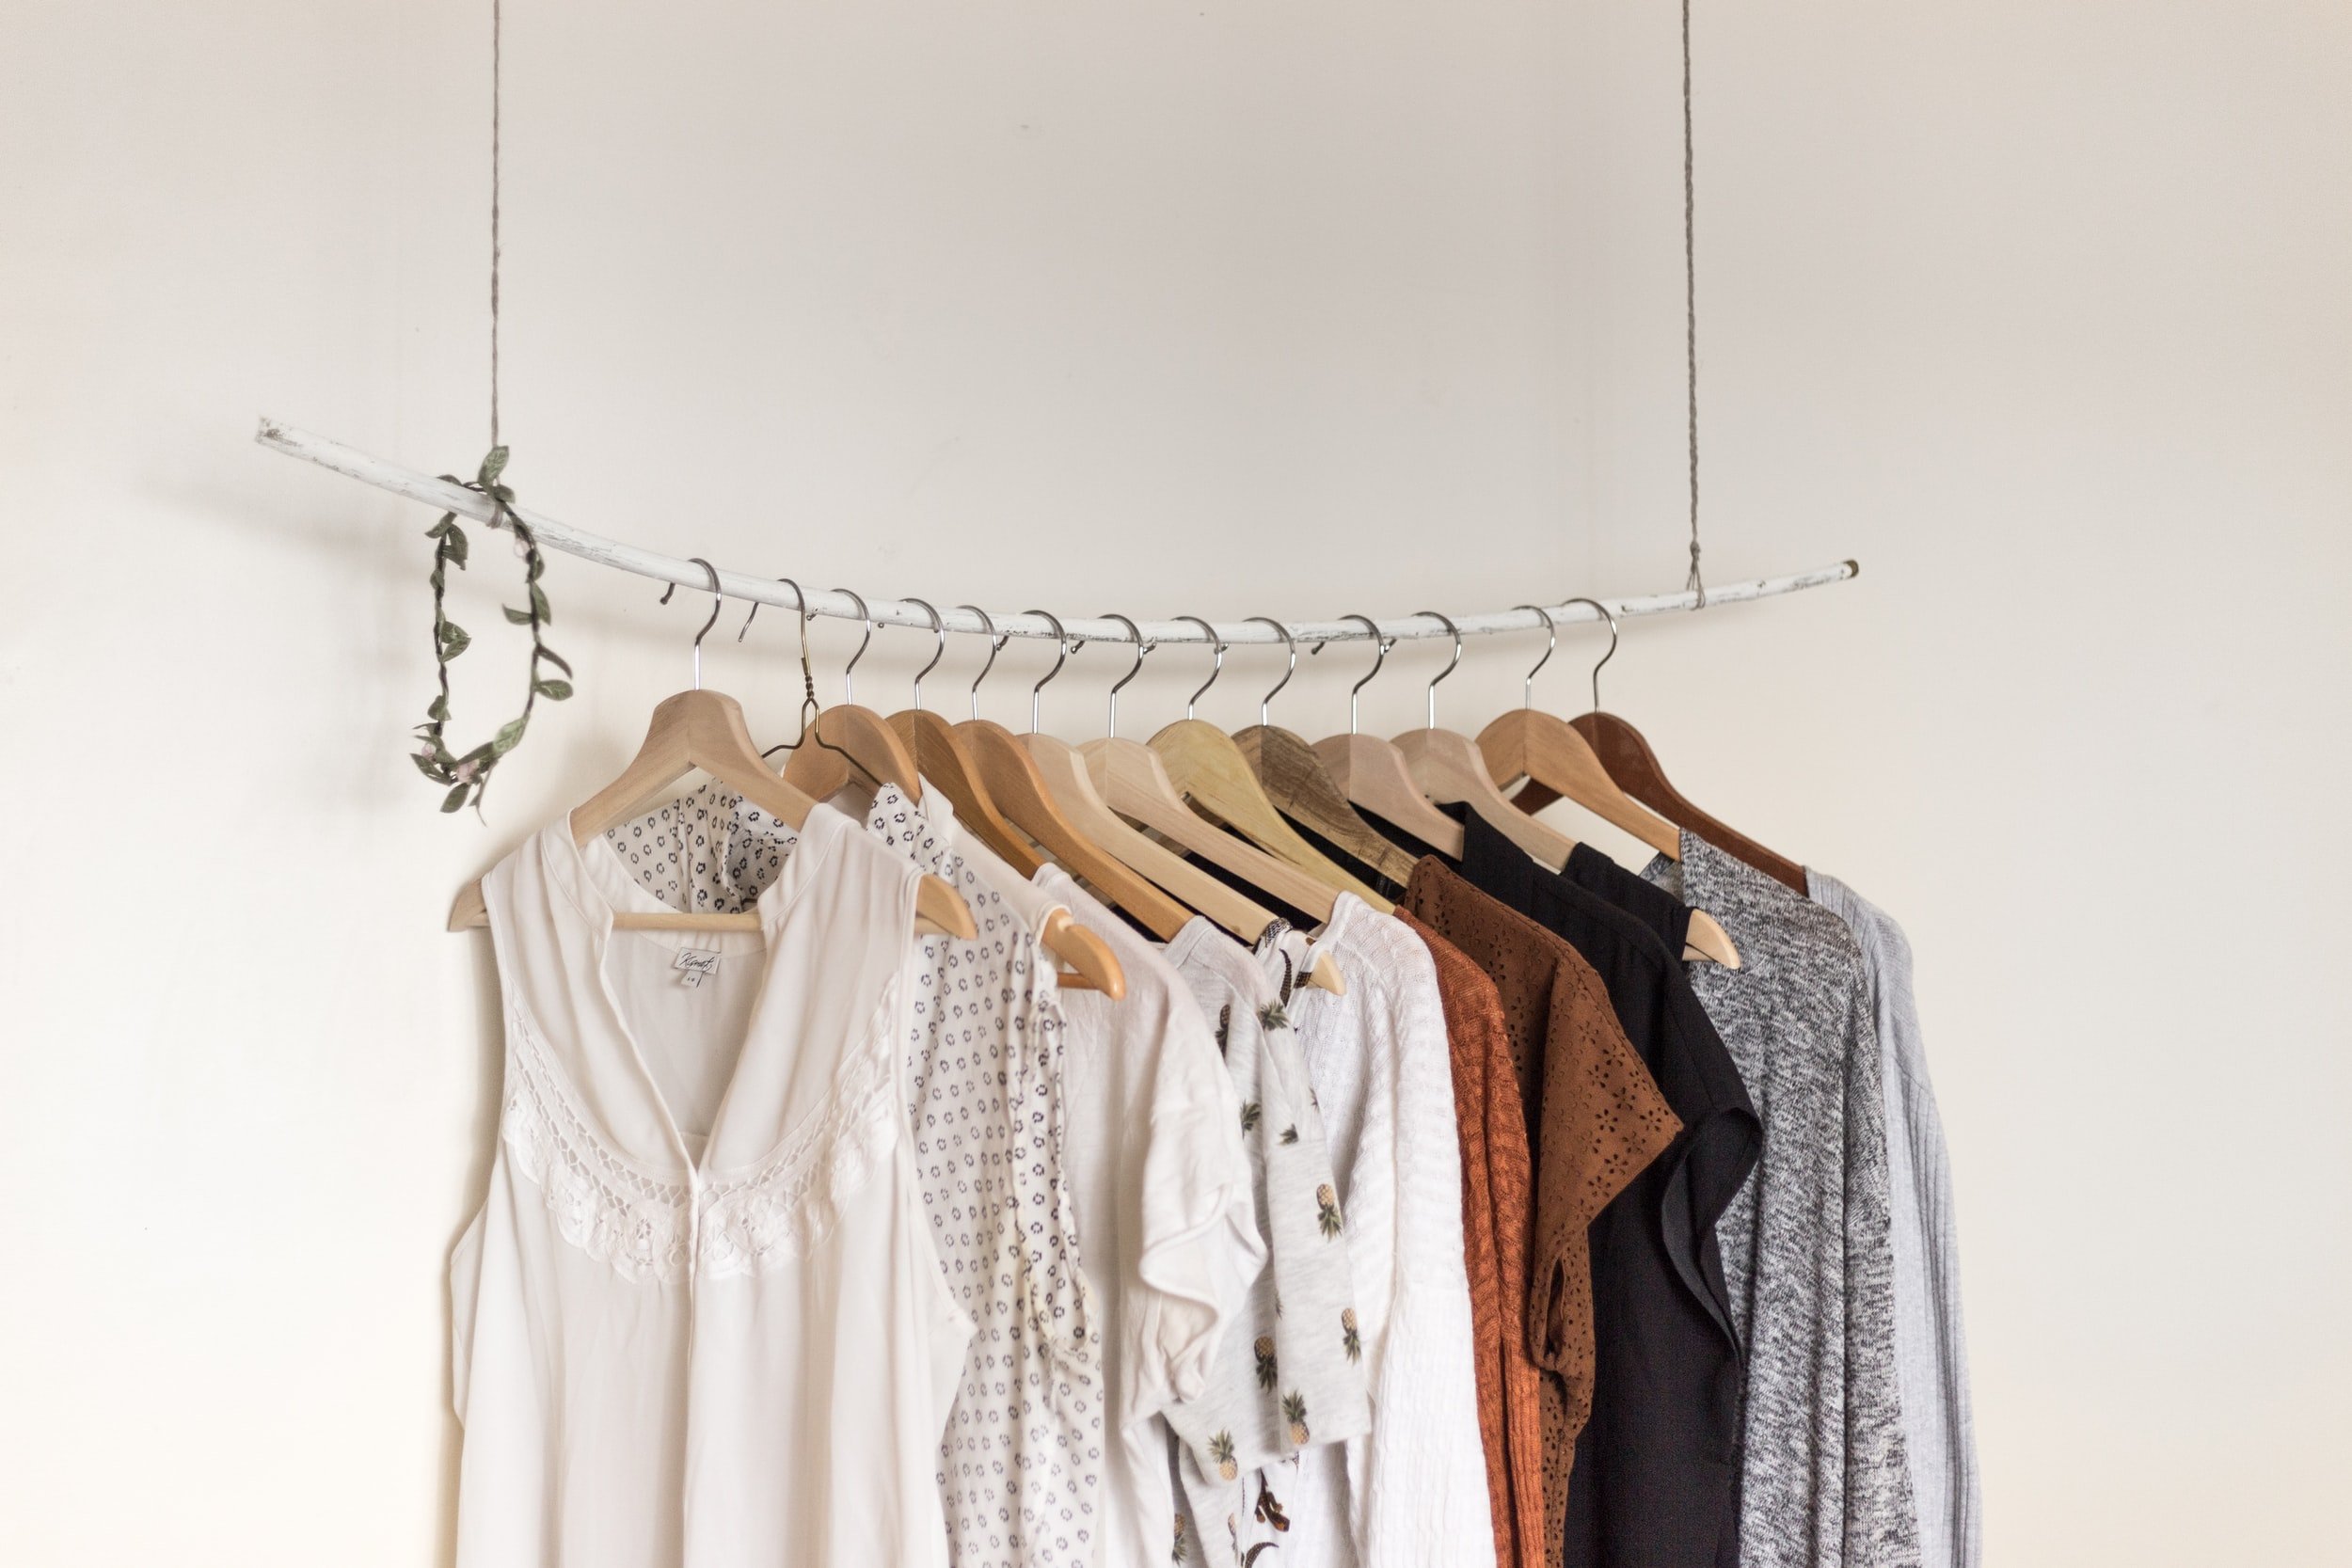 hanging branch that is being used as a clothes rod. many shirts and dresses, in neutral colors are hanging from it.